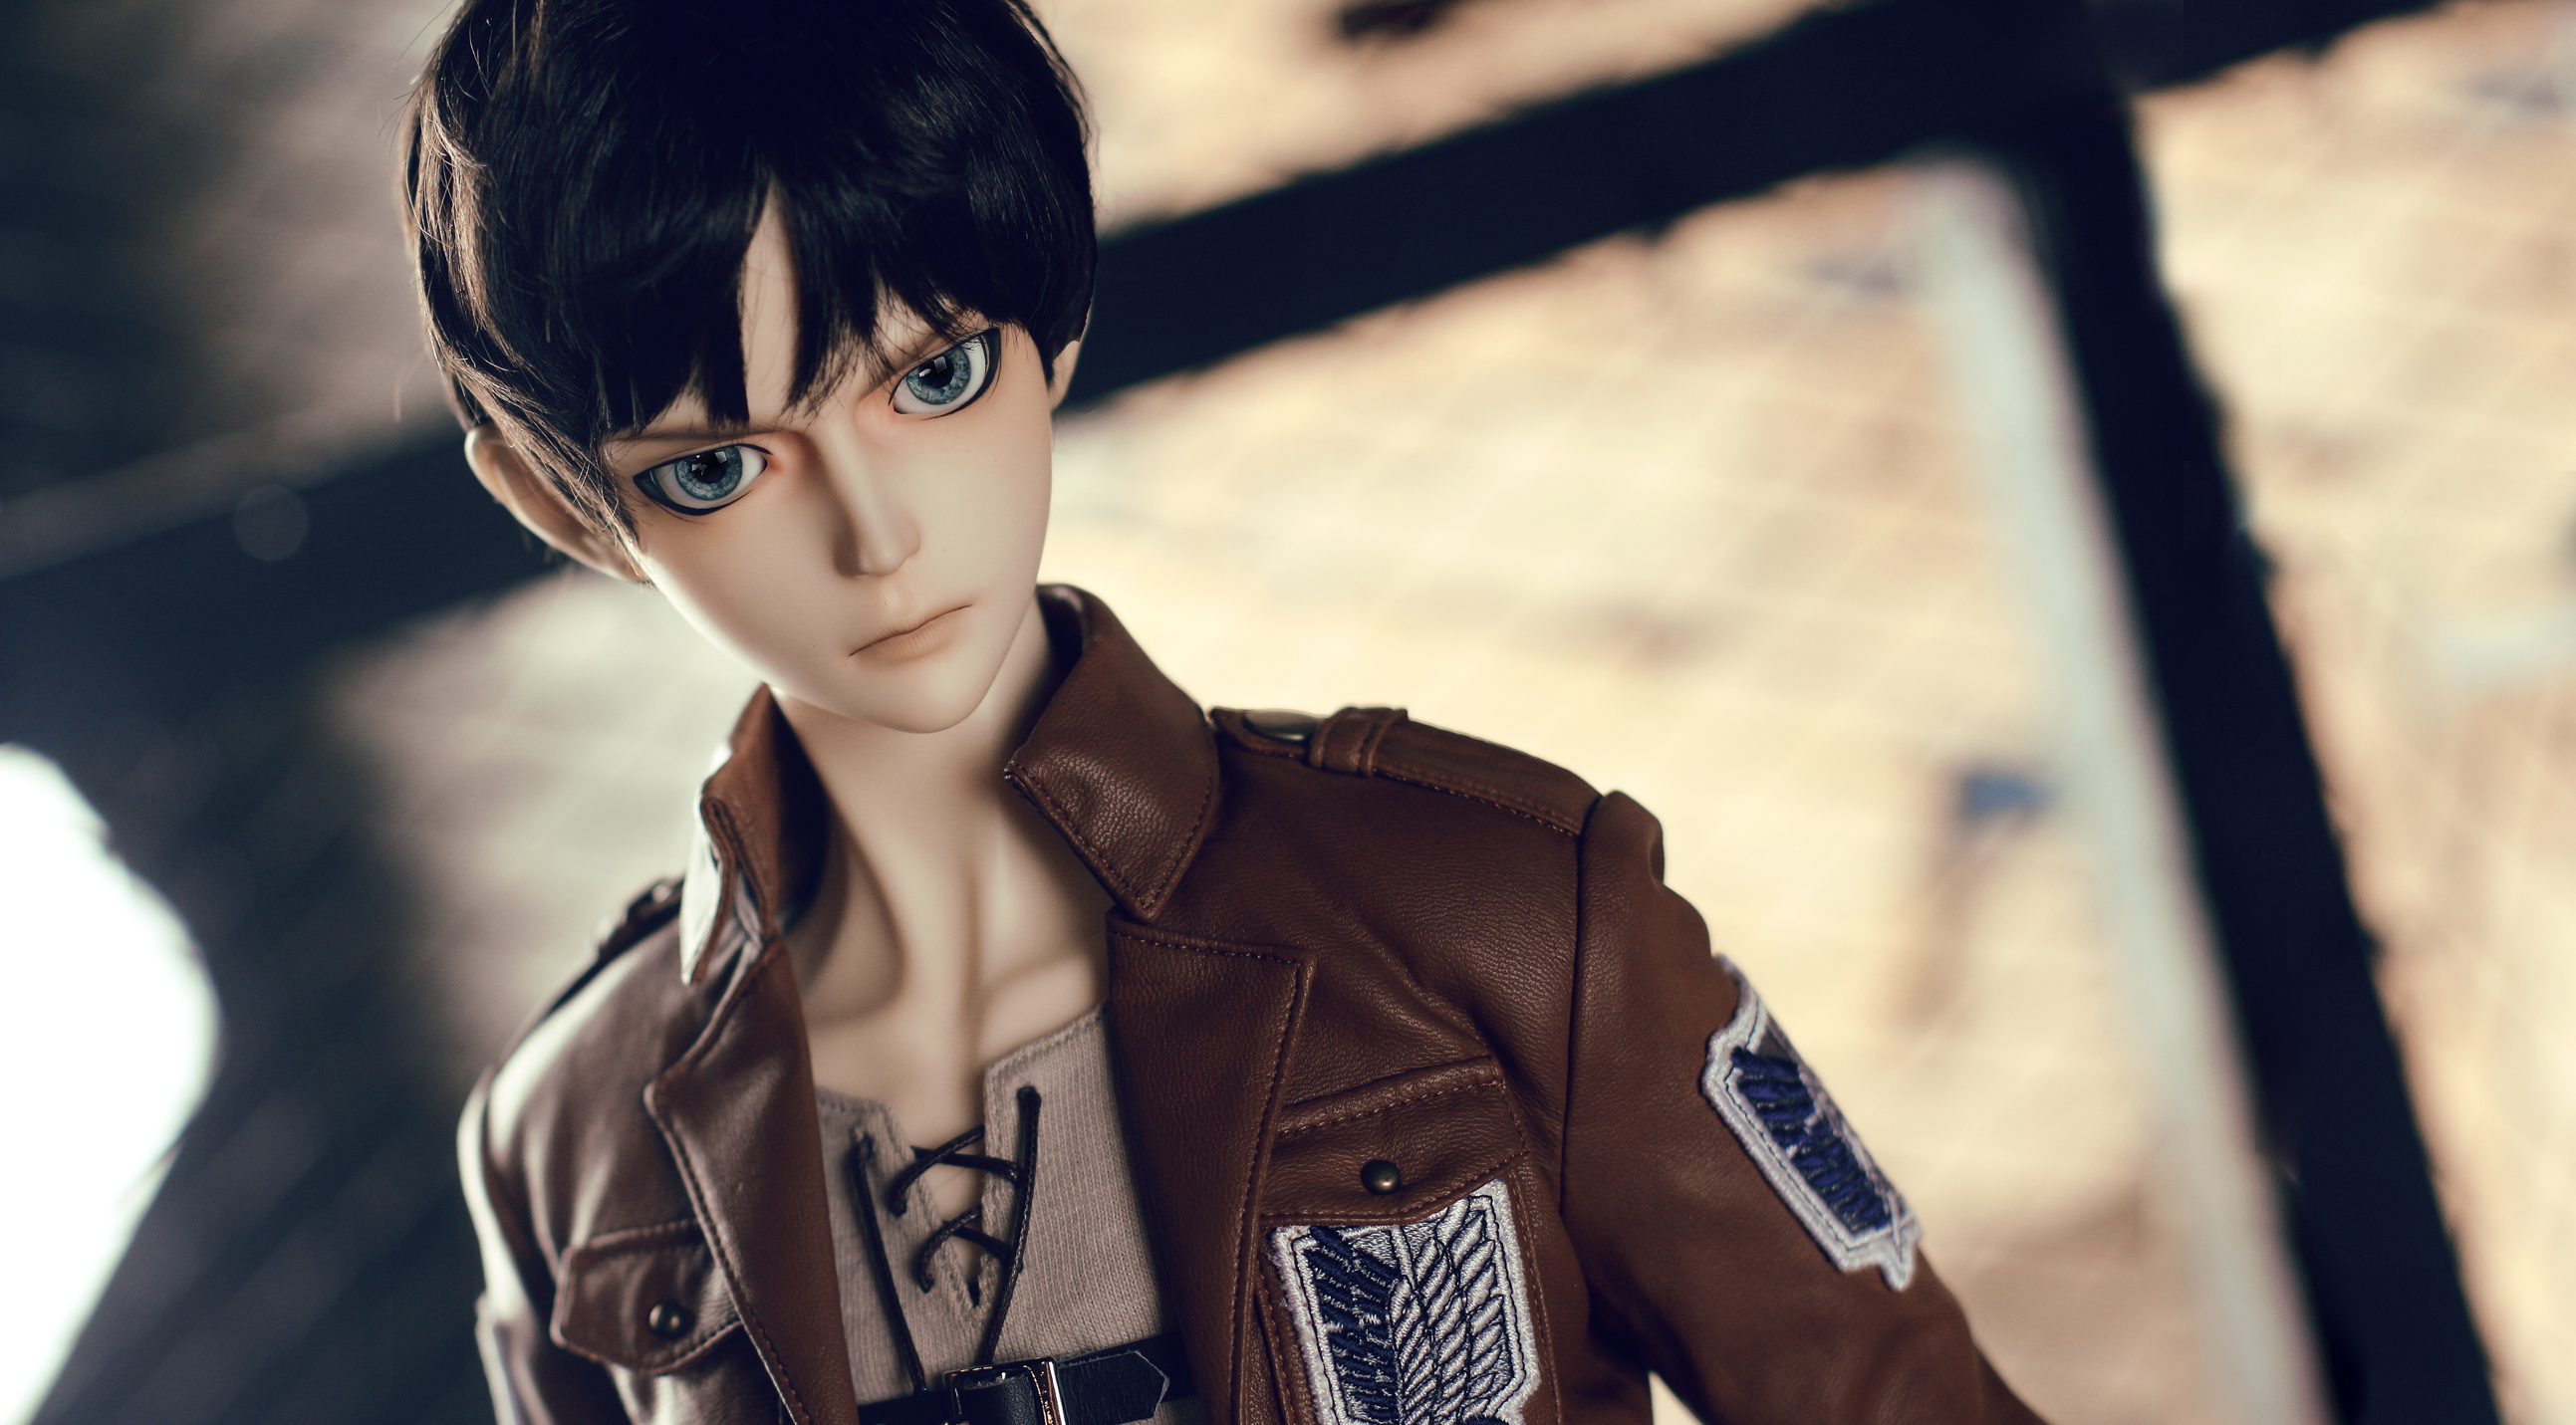 EREN YEAGER BALL JOINTED DOLL